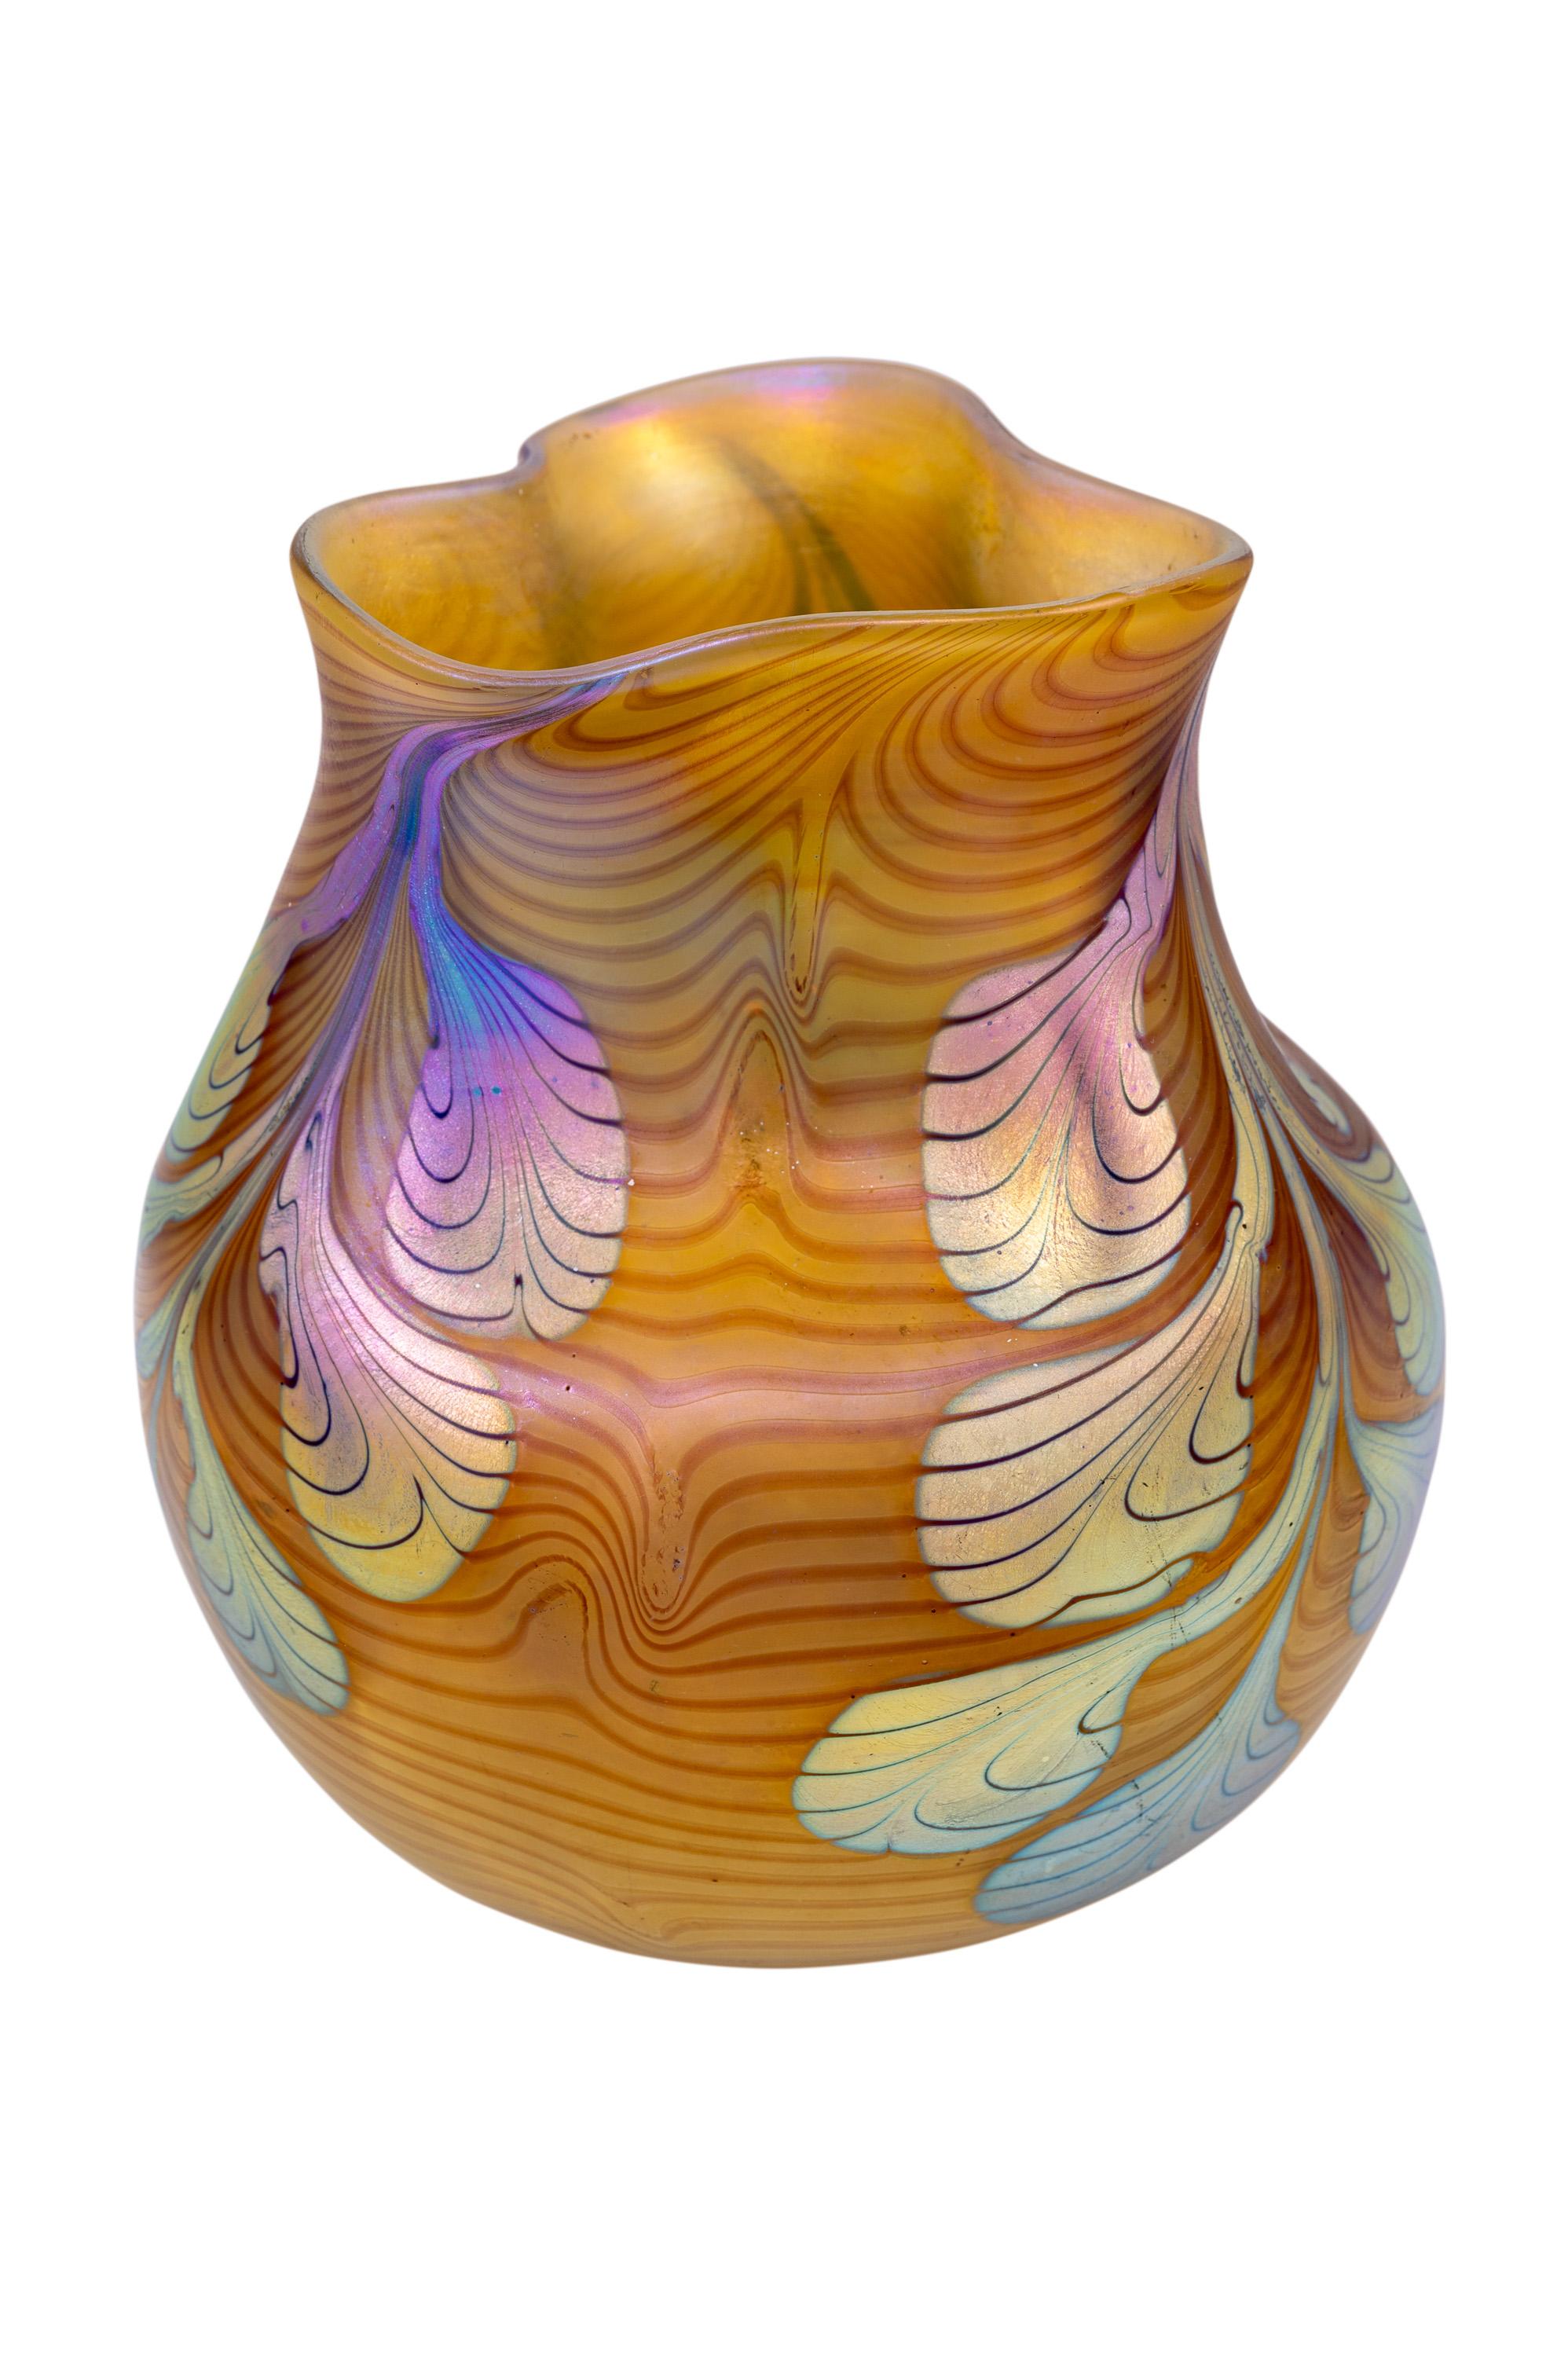 Vase, Johann Loetz Witwe, unidentified decoration, ca. 1903/04

Glass, mould-blown and freeform, reduced and iridescent

The first vases with stylized leaves were designed by Franz Hofstötter in 1900 for the World Exhibition in Paris. The strongly